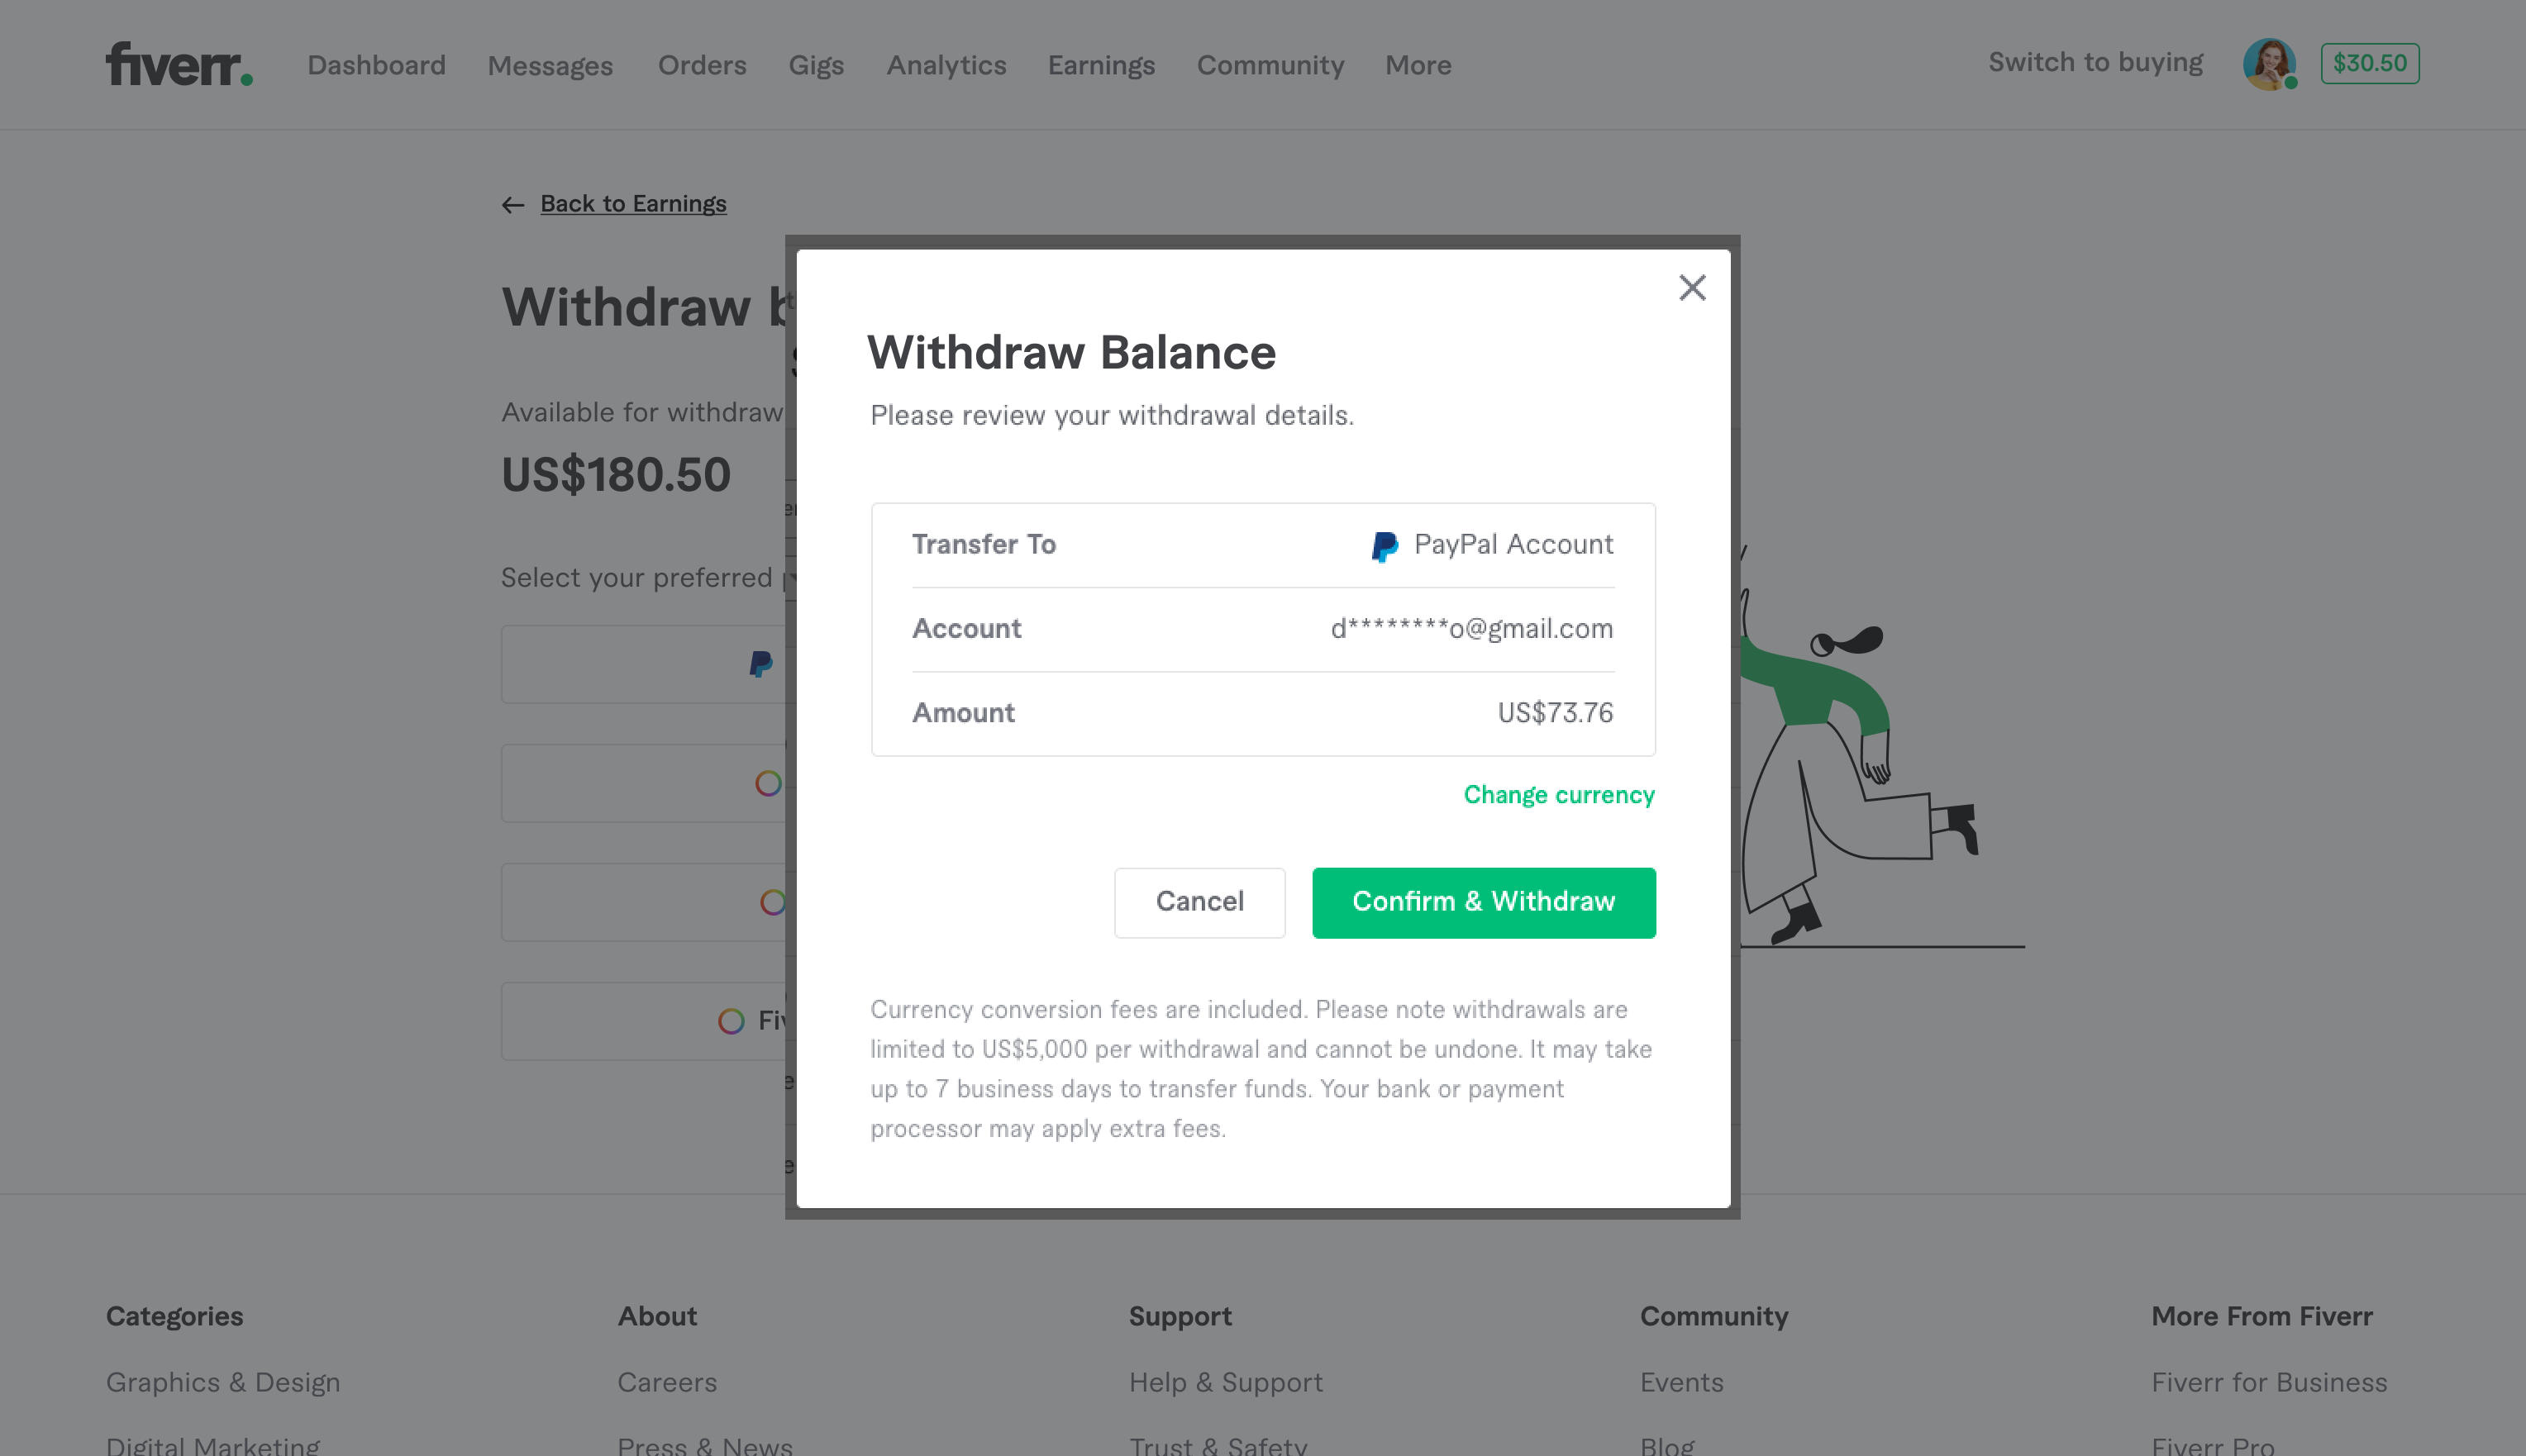 Can I Withdraw Money From Fiverr to PayPal? - bitcoinhelp.fun